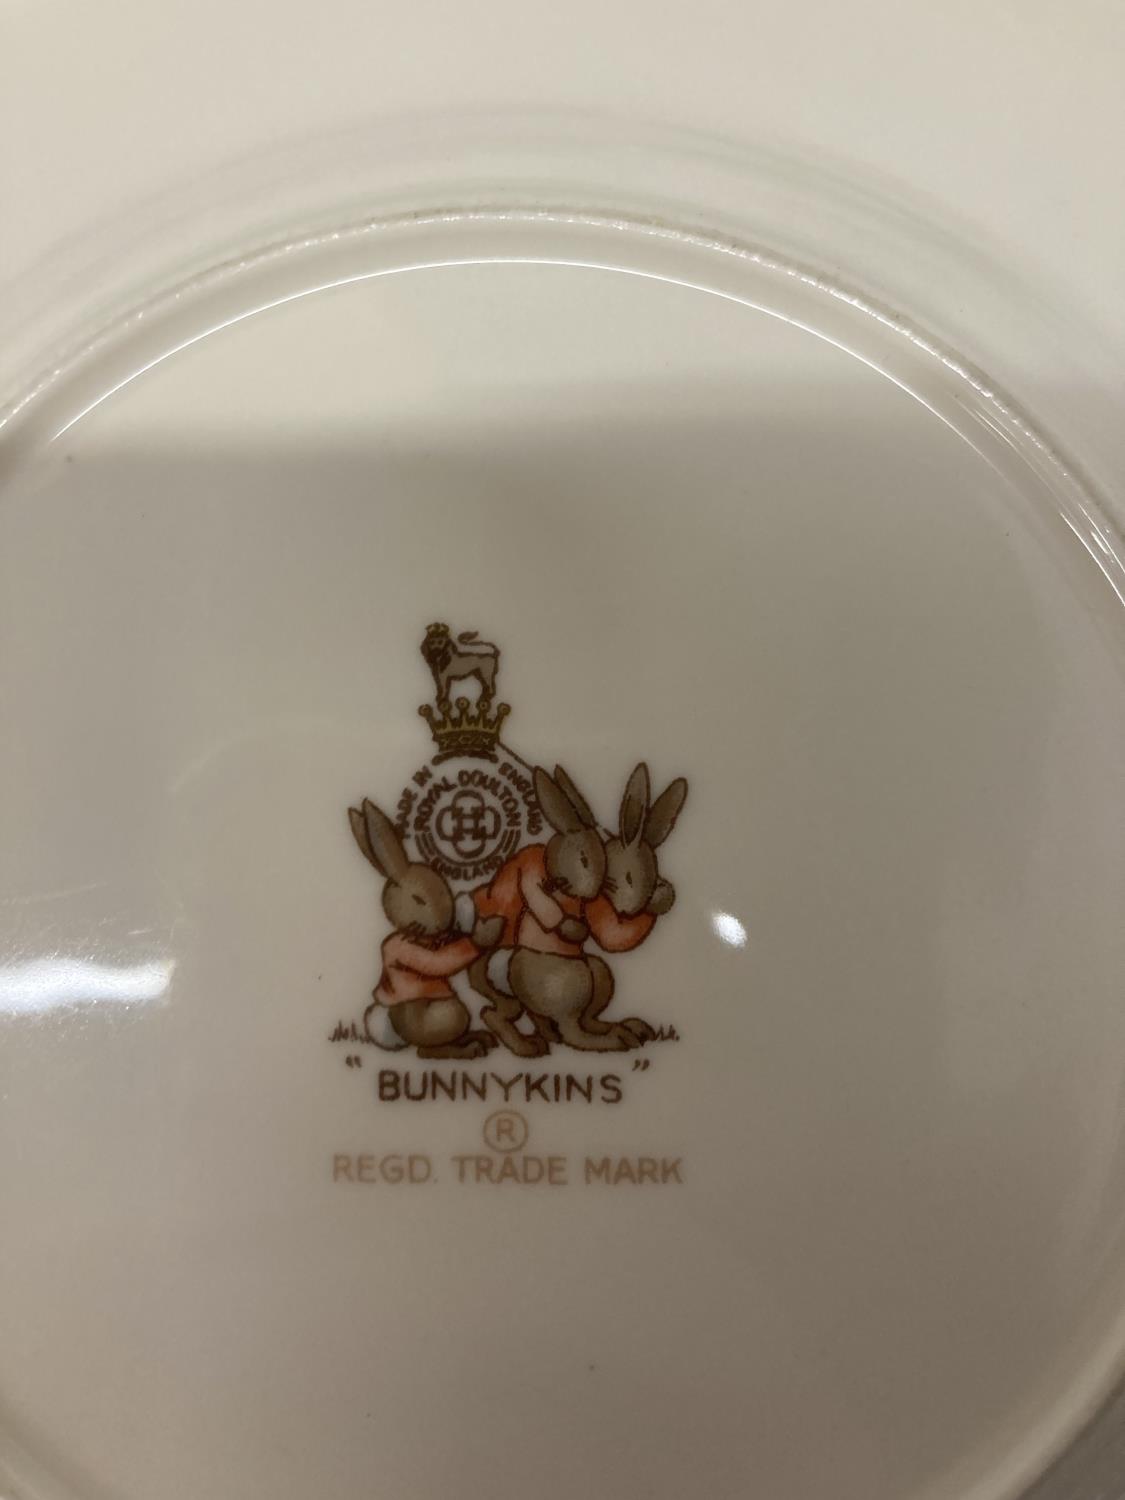 A COLLECTION OF ROYAL DOULTON 'BUNNYKINS' DINNERWARE TO INCLUDE BOWLS, PLATES, A CUP AND SAUCER - Image 3 of 3